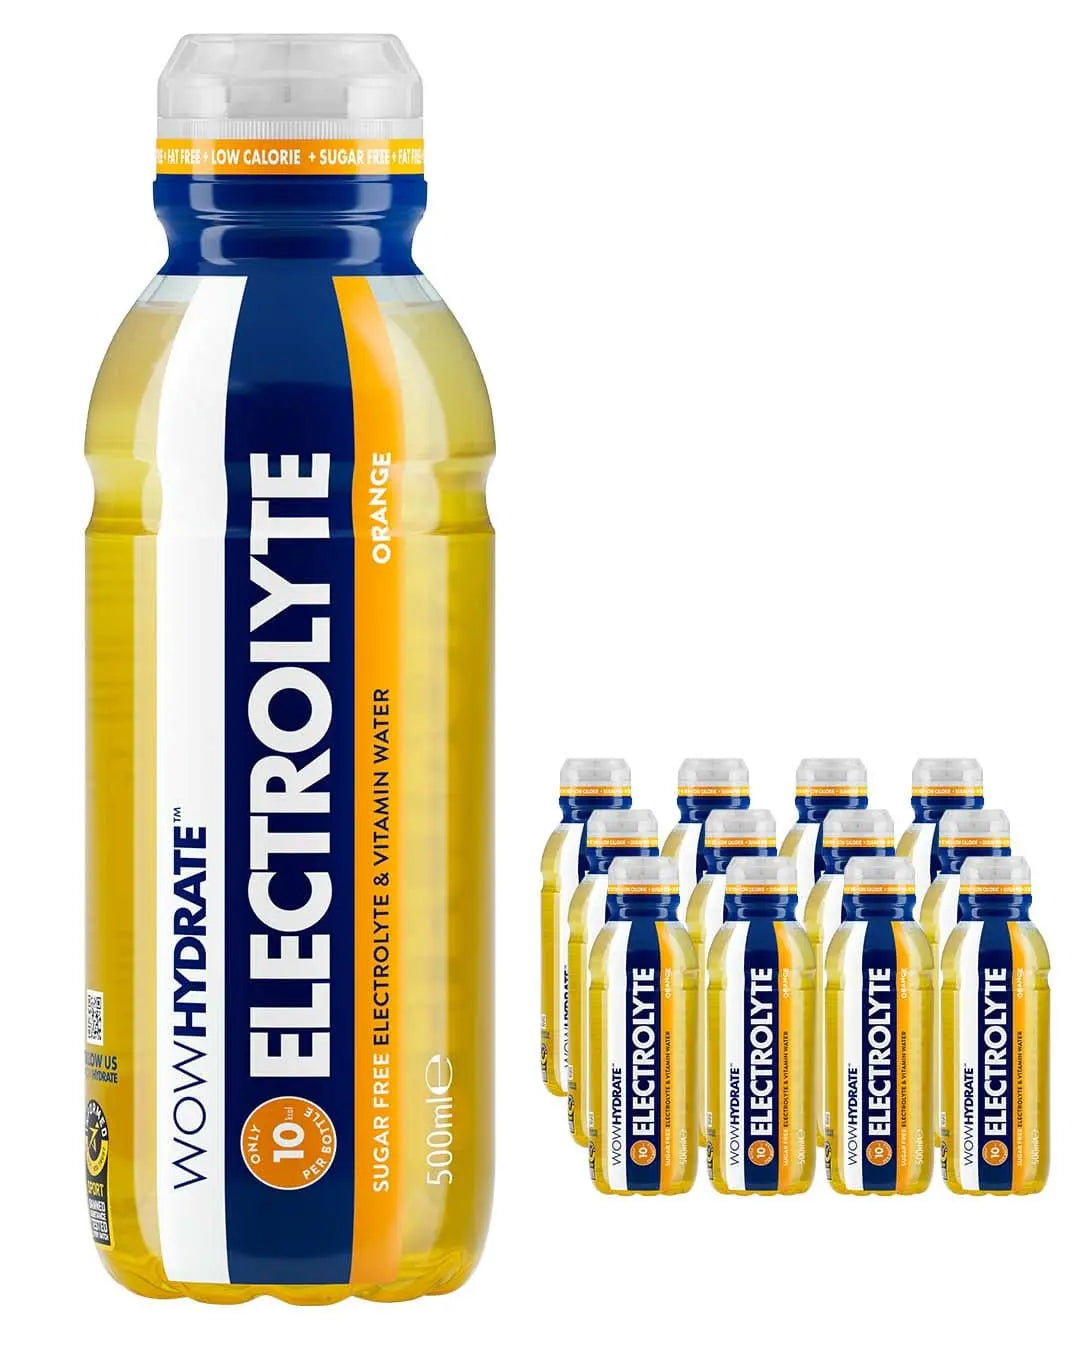 Wow Hydrate Electrolyte Orange Drink Multipack, 12 x 500 ml Soft Drinks & Mixers